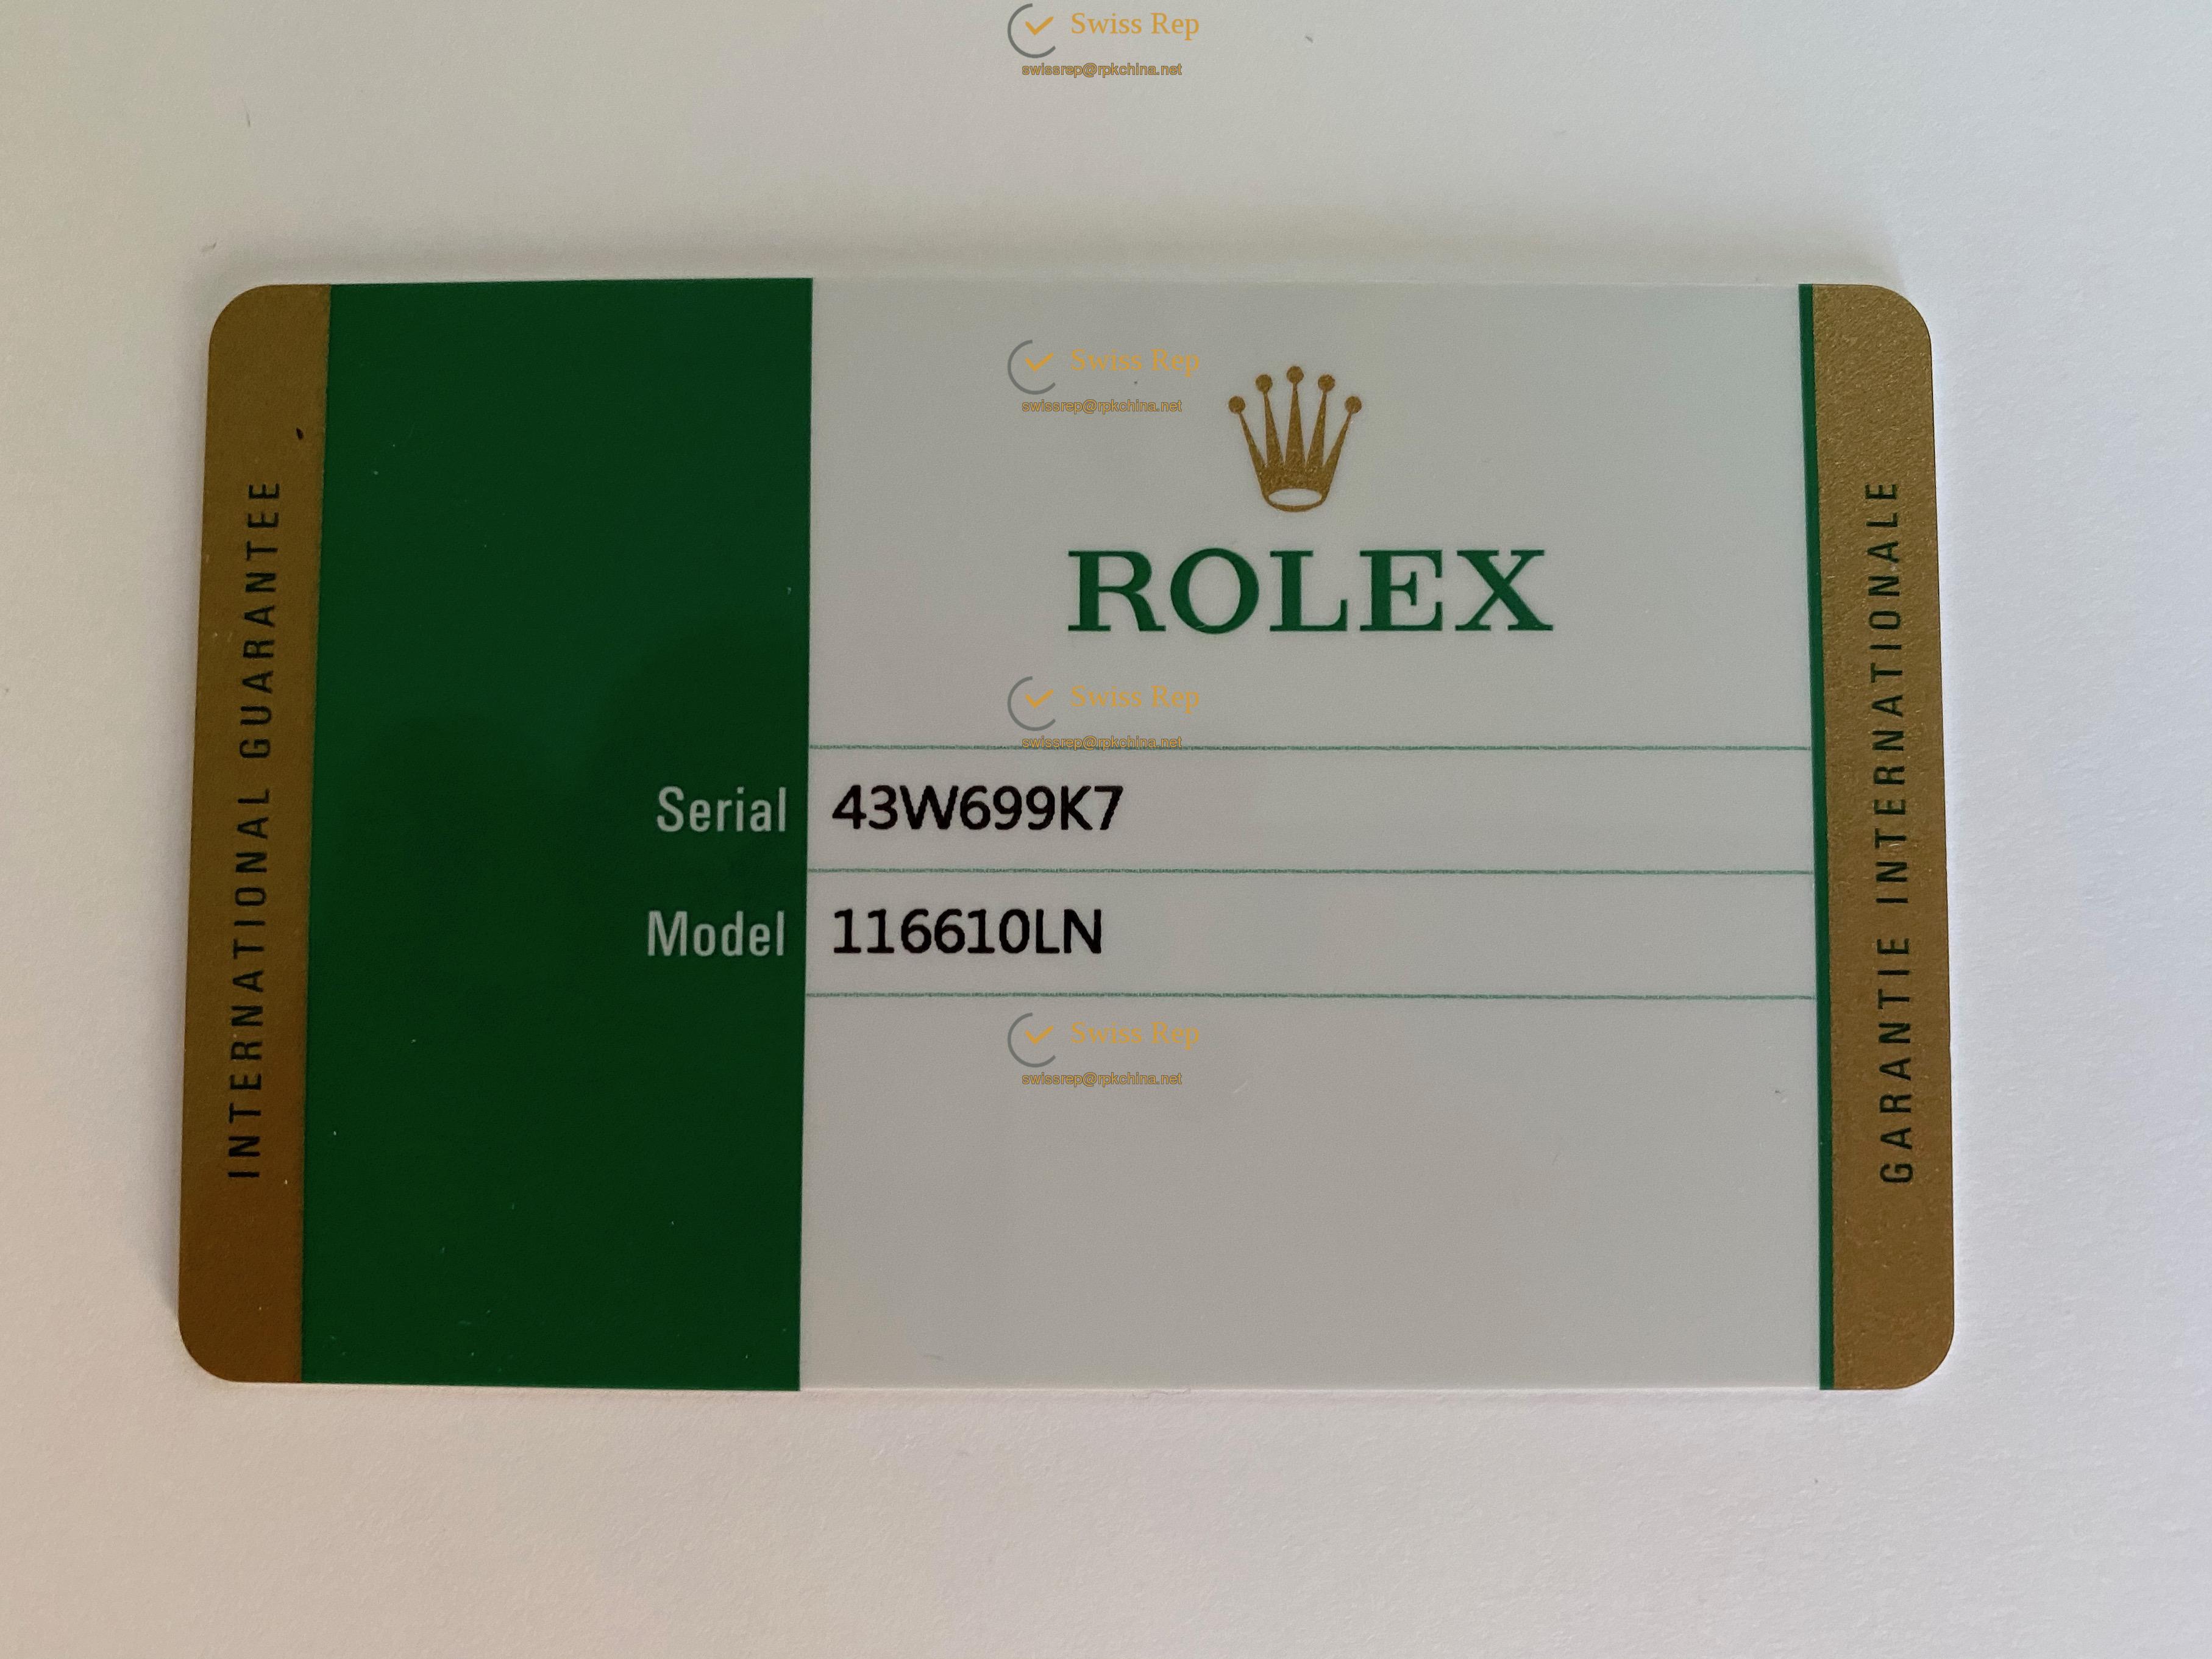 Rolex Card Custom Made Rolex Warranty Card with Anti-Forgery Crown and Fluorescent Label - AAA Replicas